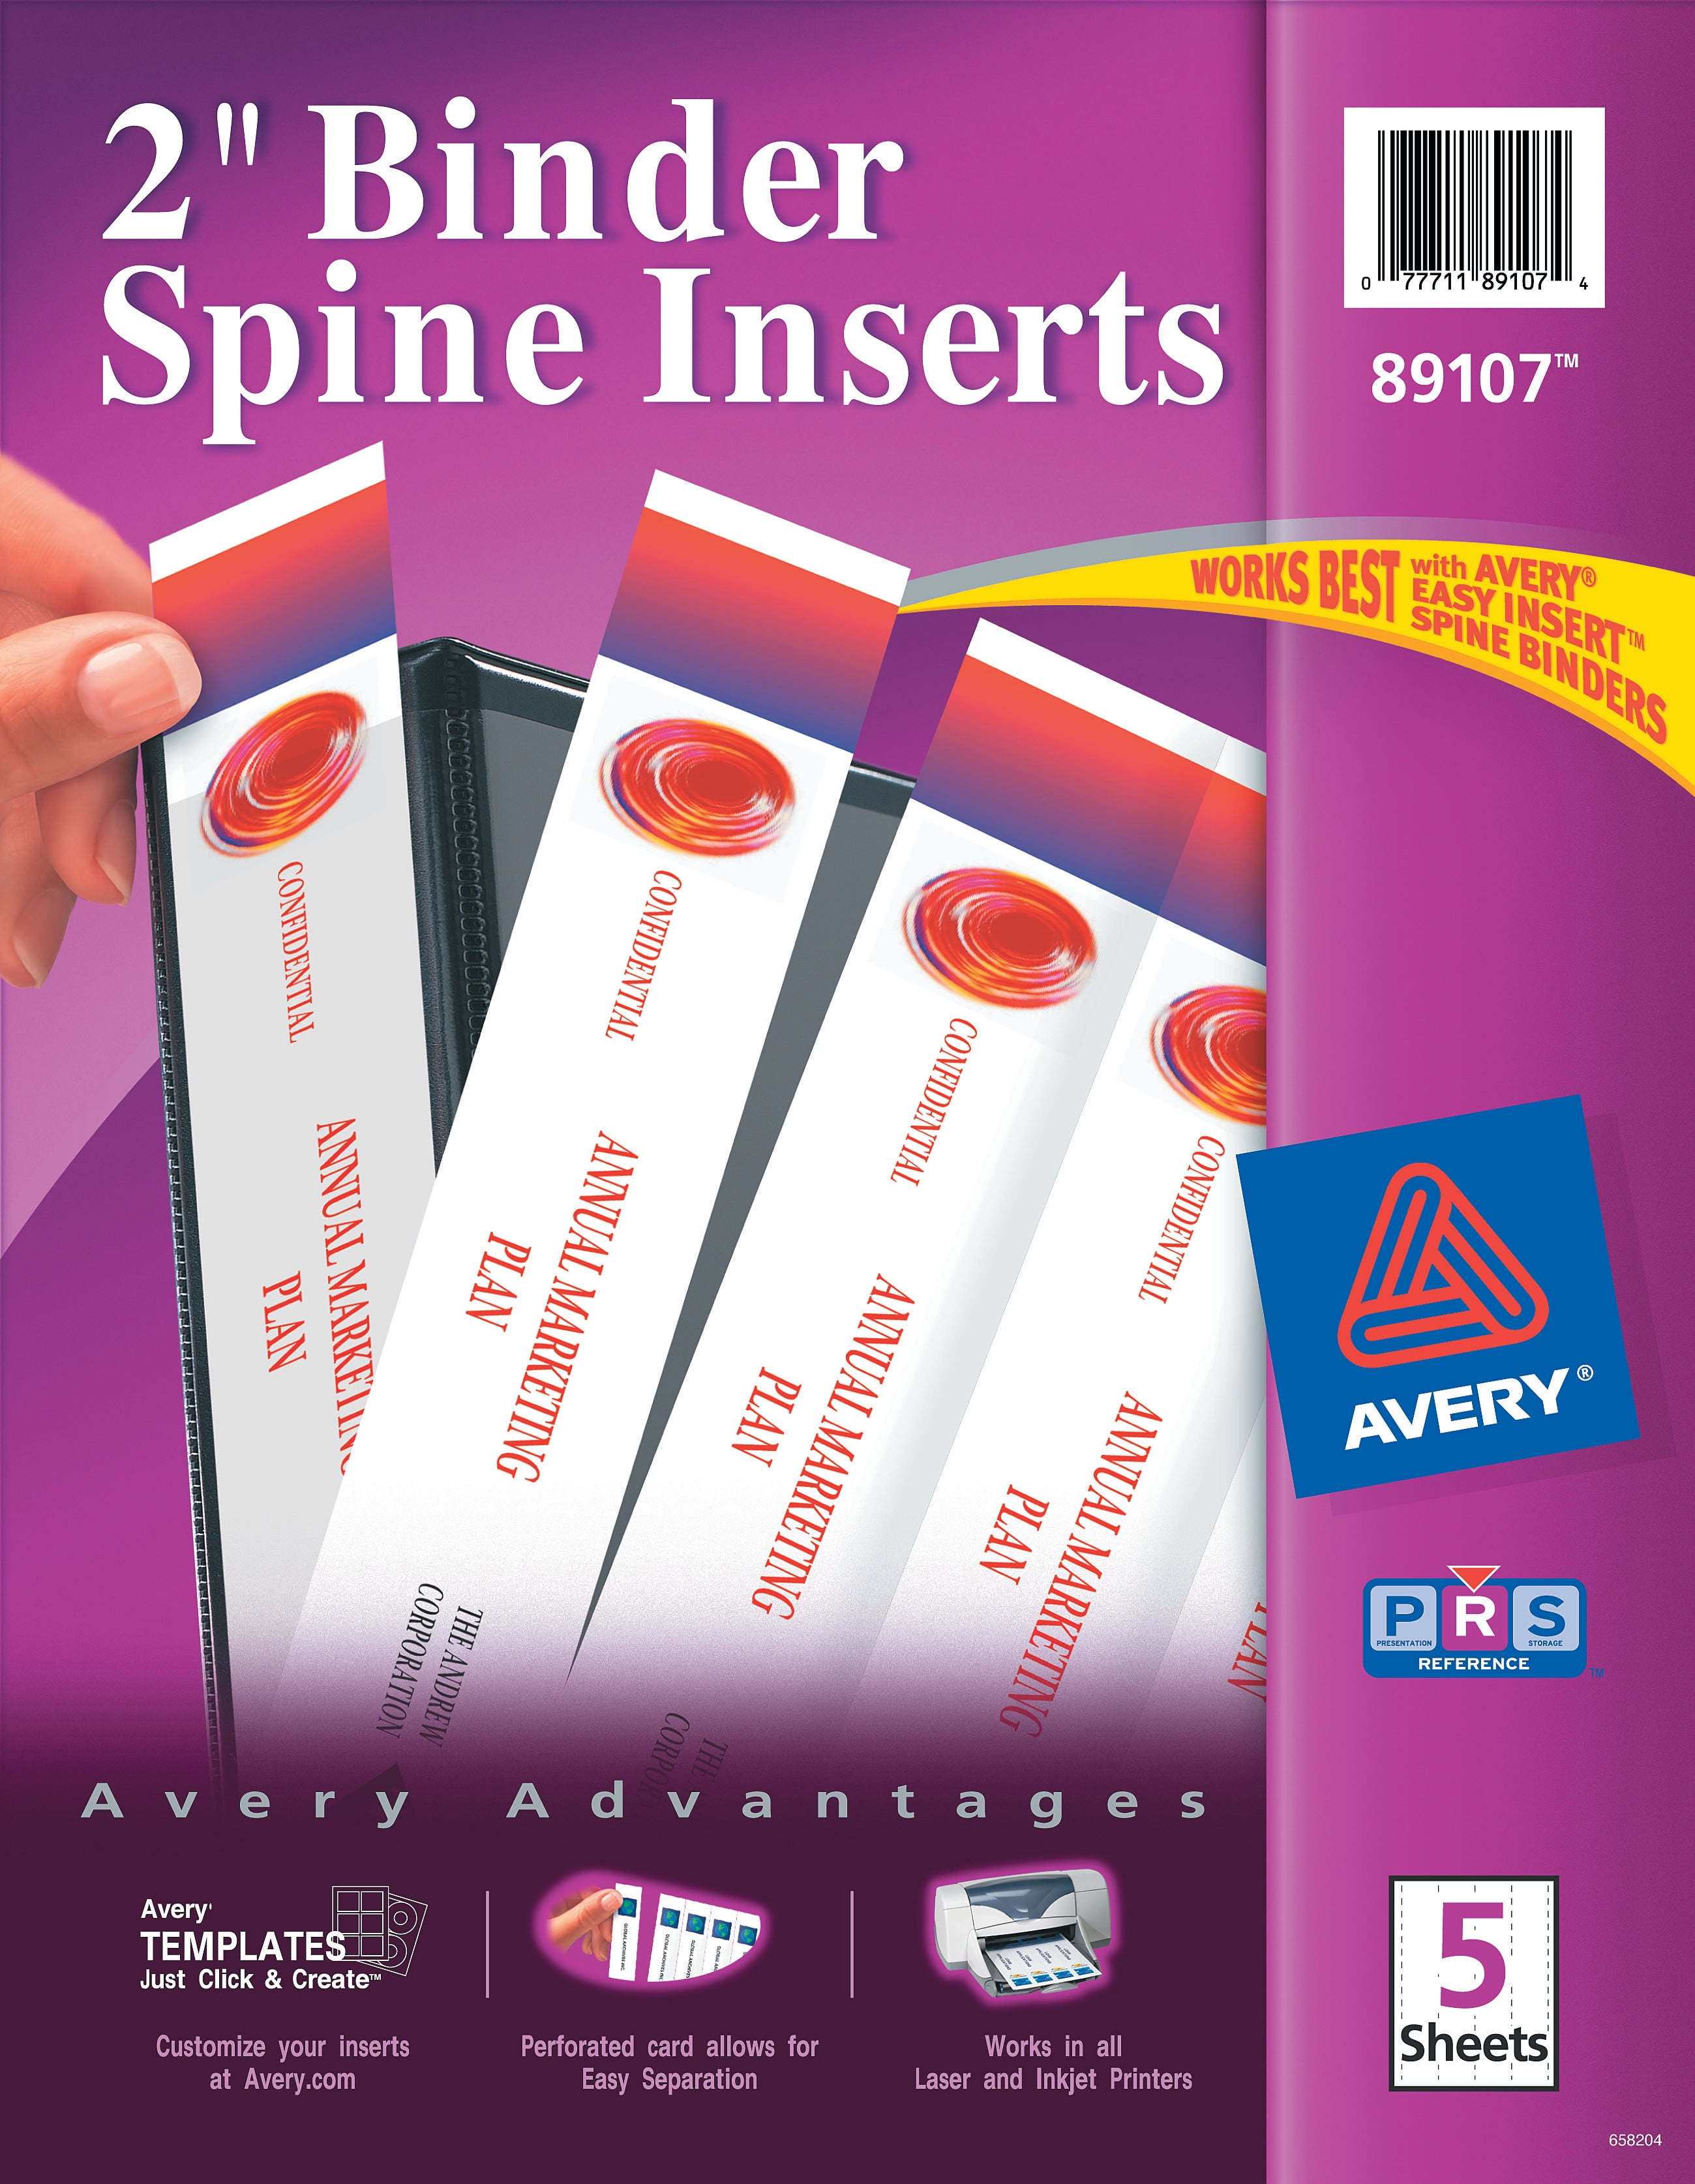 Avery 2" Binder Spine Inserts 89107 5 Sheets 20 Inserts 